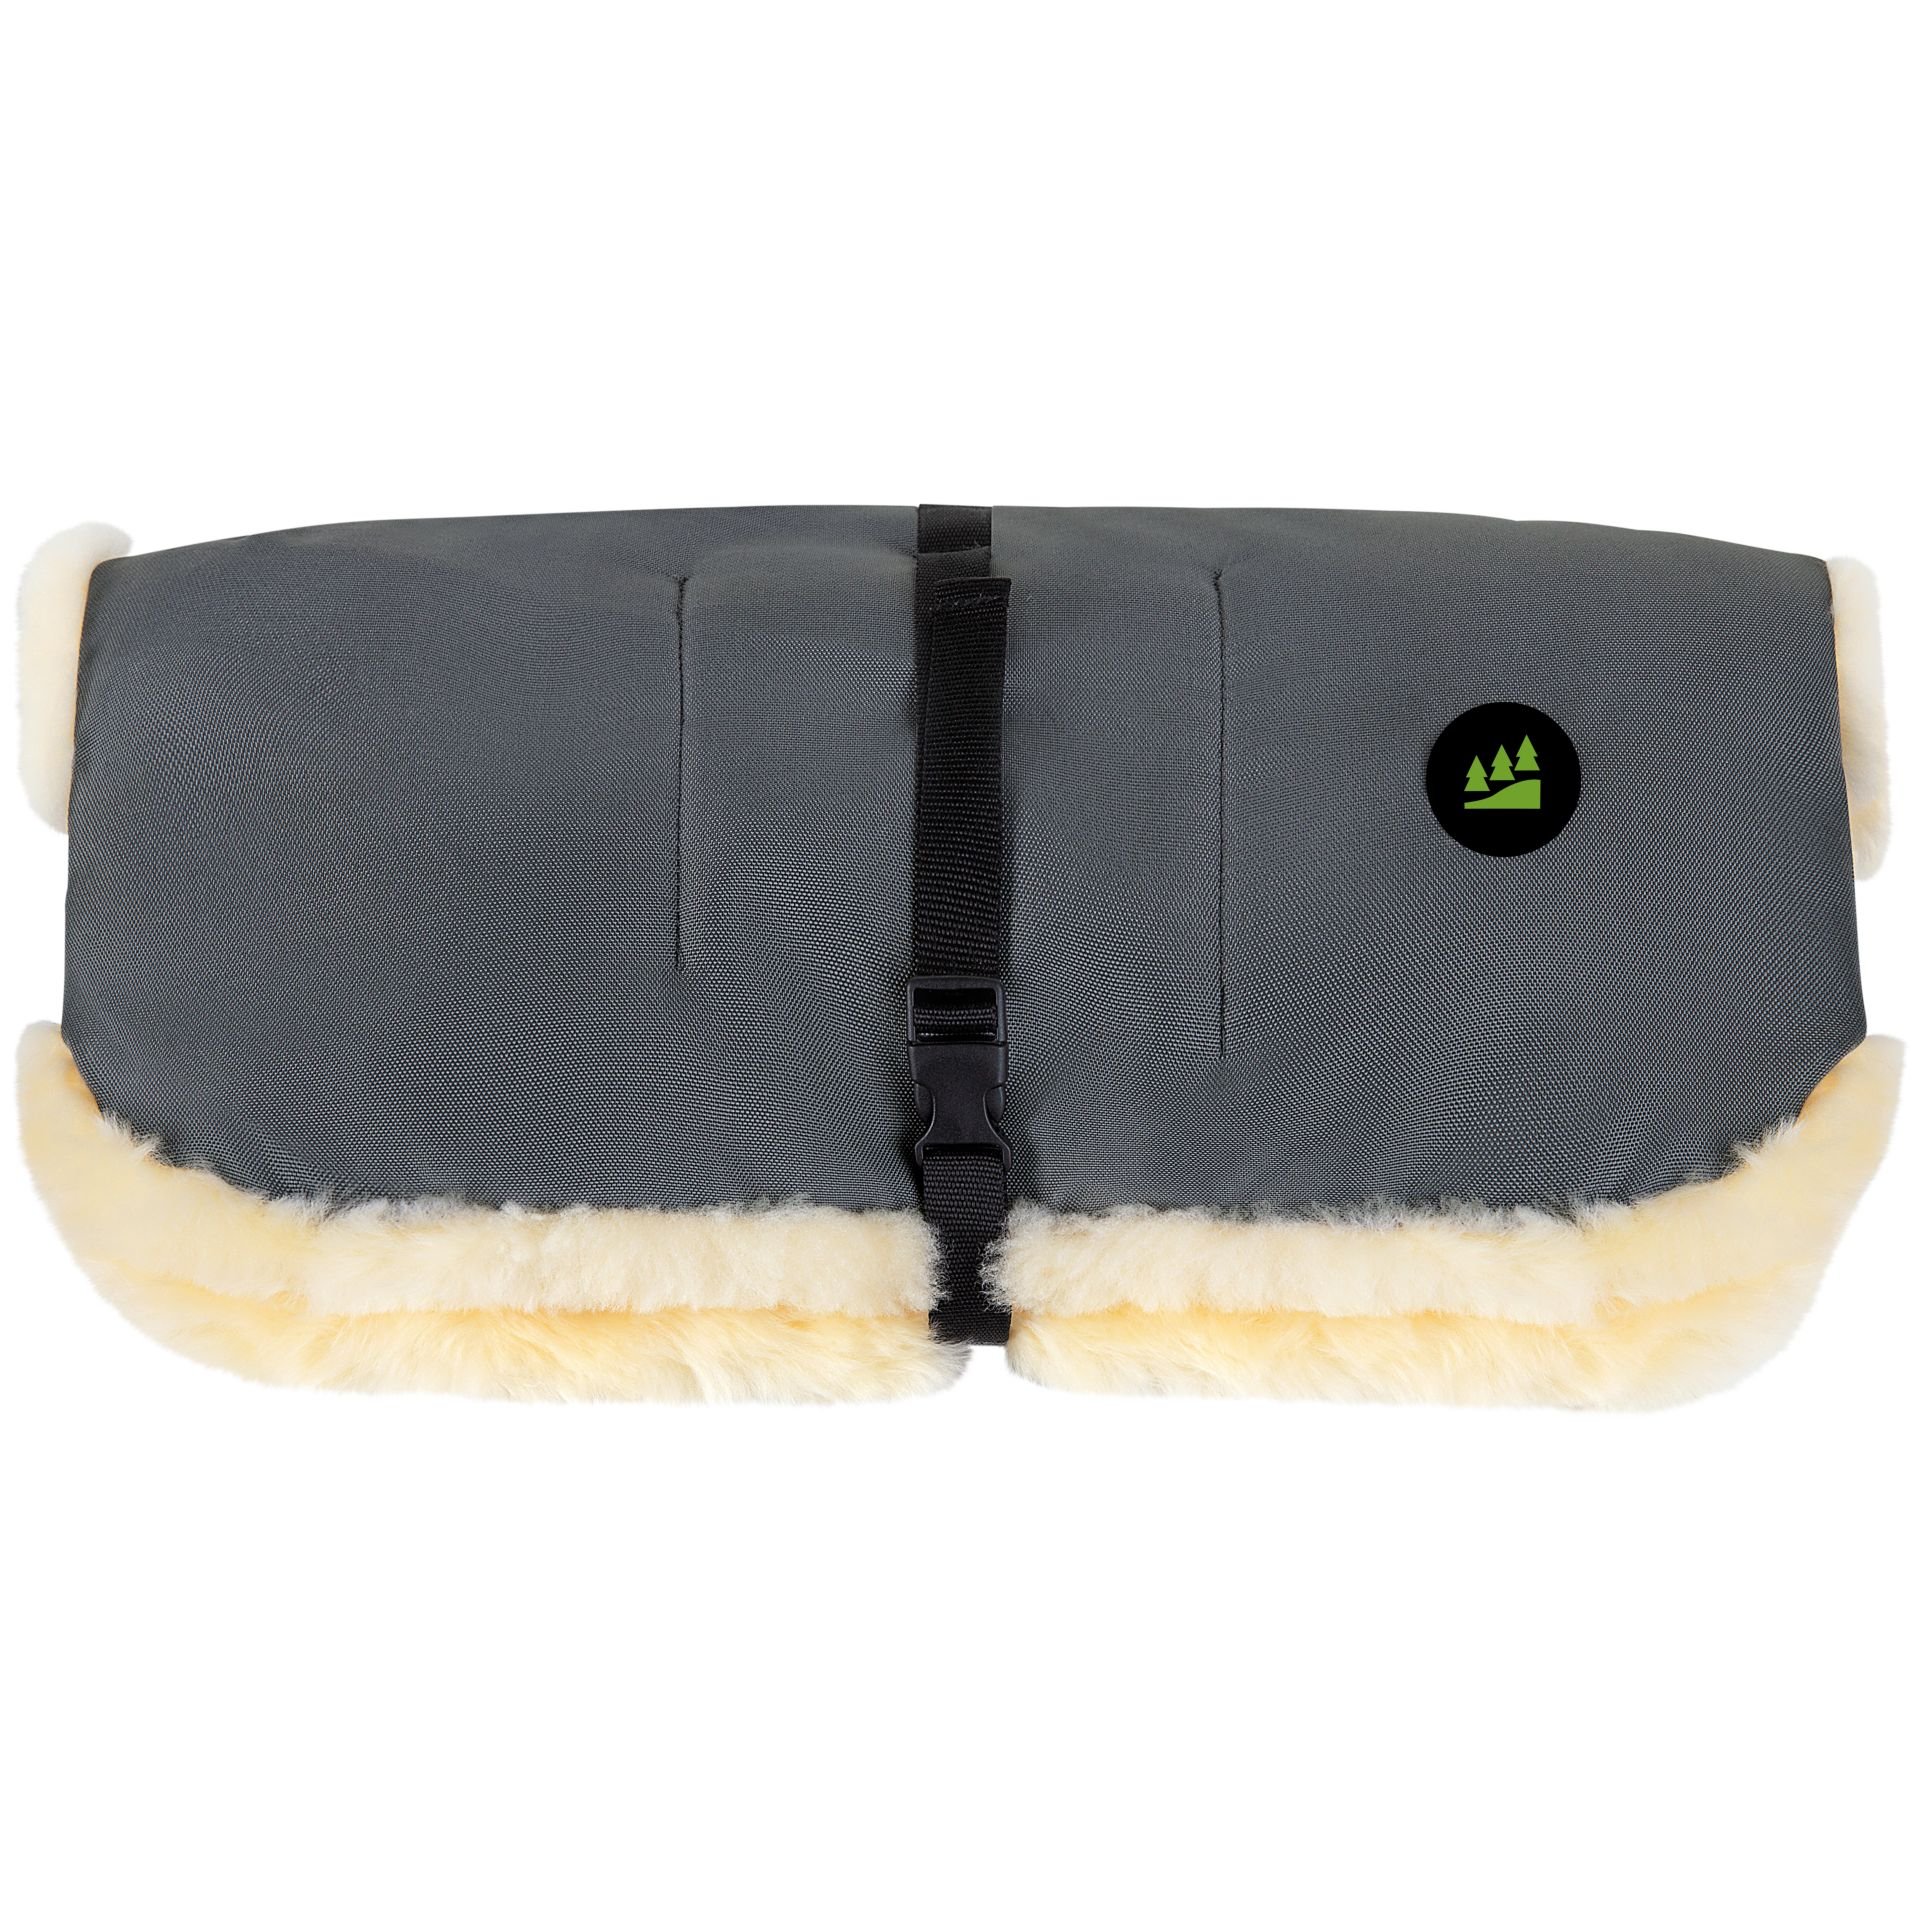 Odenwälder Muffolo long lambskin: High quality for cold days